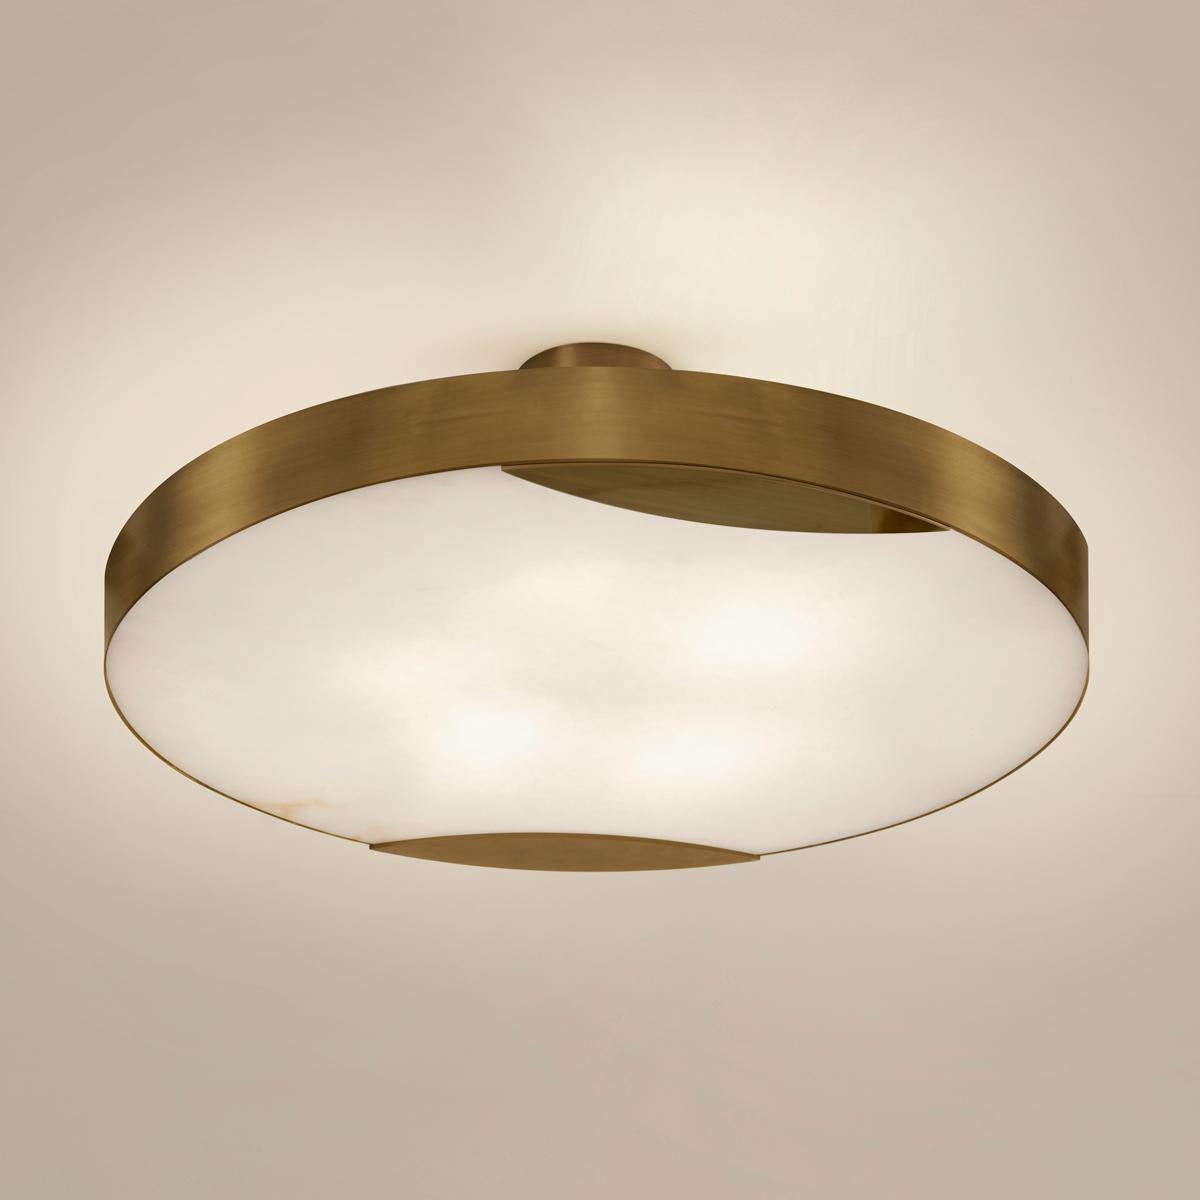 Cloud N.1 Ceiling Light by Gaspare Asaro-Polished Brass Finish For Sale 1